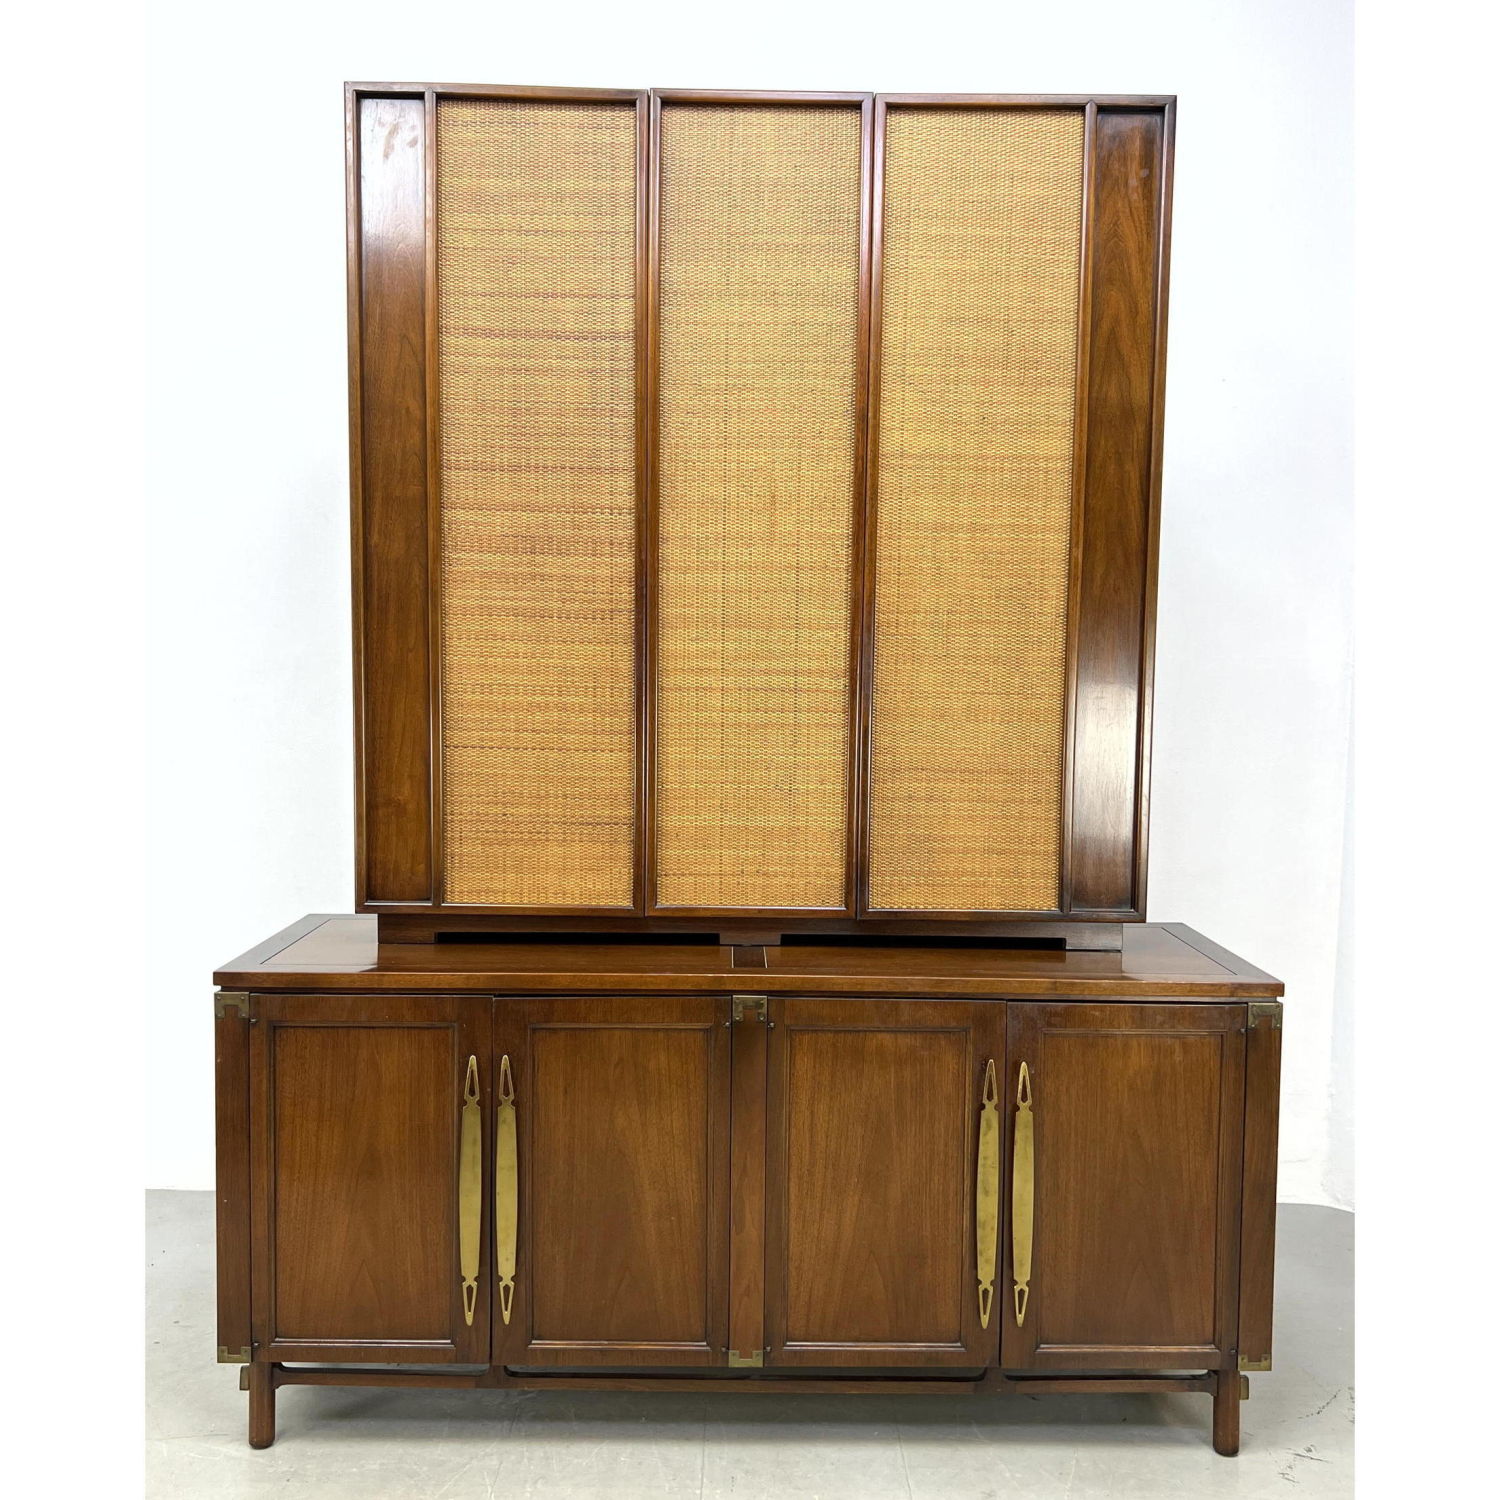 HERITAGE Two Part Credenza with